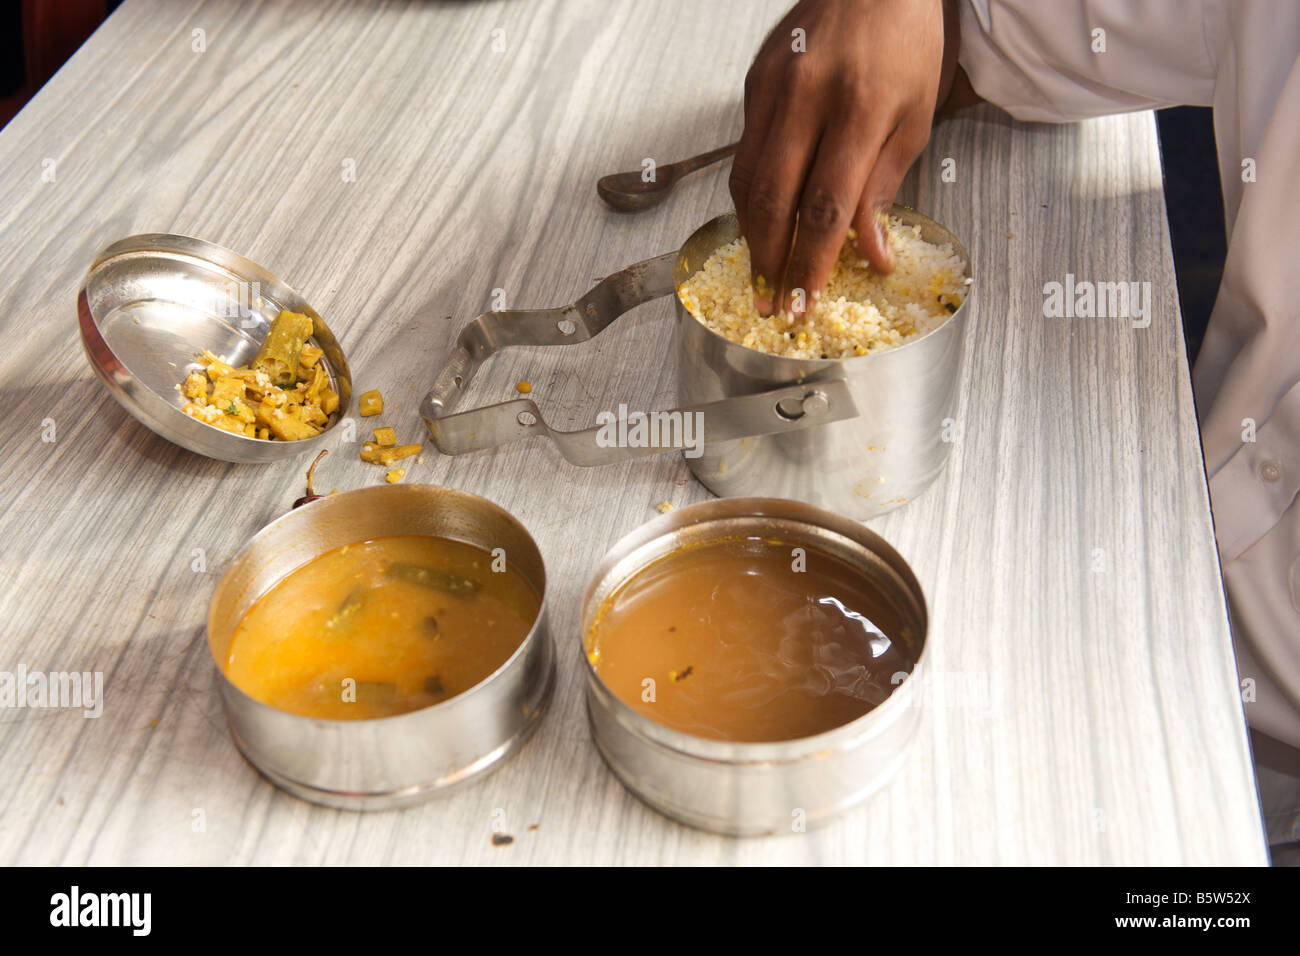 Indian Made Hot Box For Food Storage Stock Photo, Picture and Royalty Free  Image. Image 129500303.